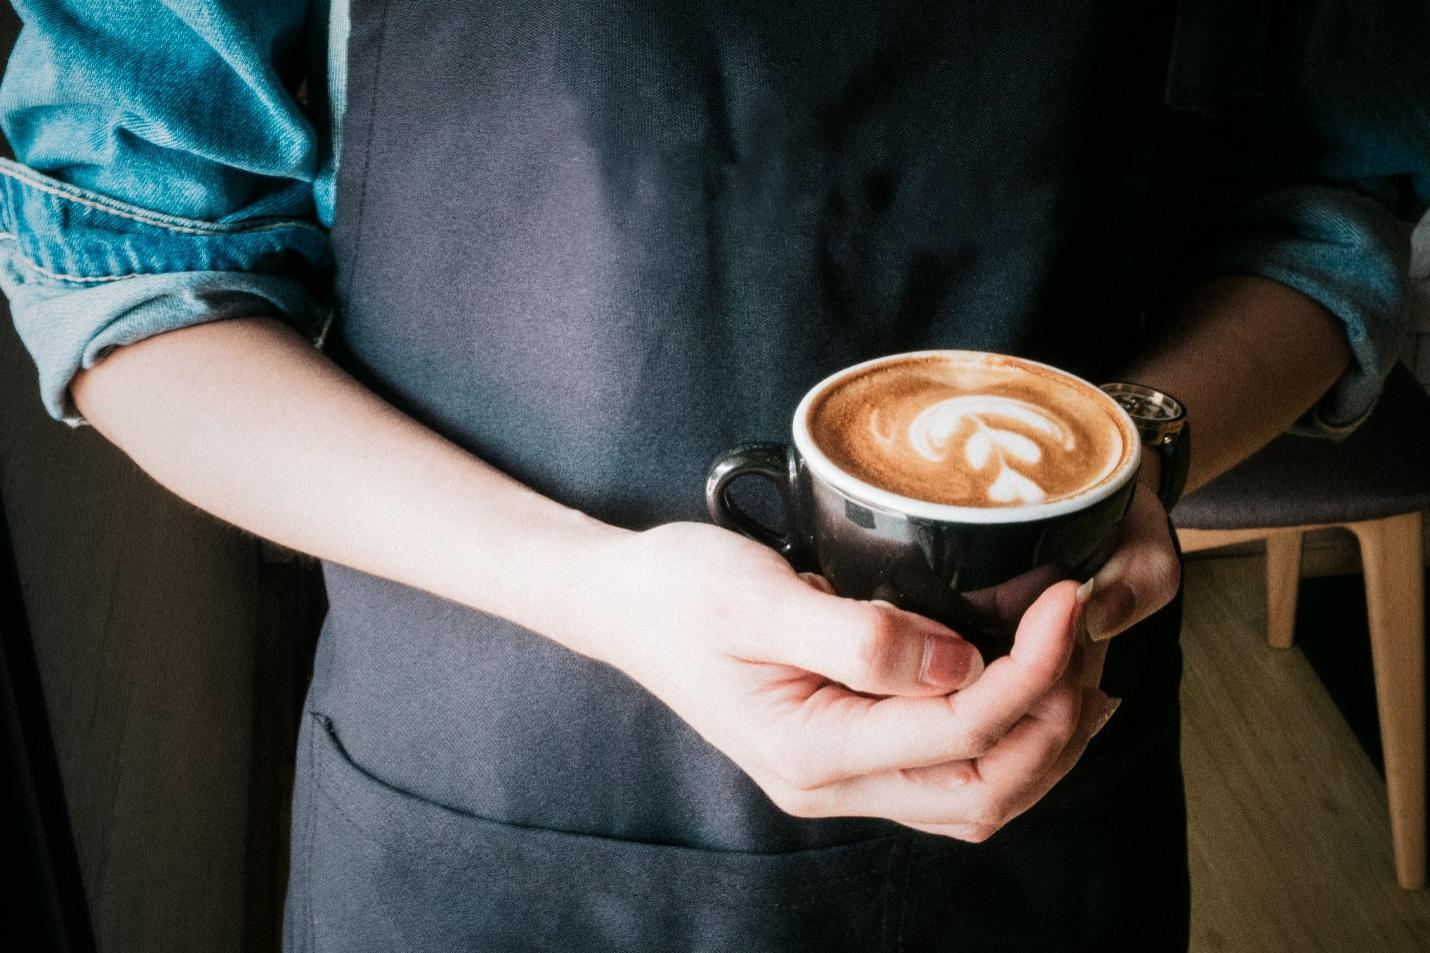 A person holding a cup of coffee in their hand